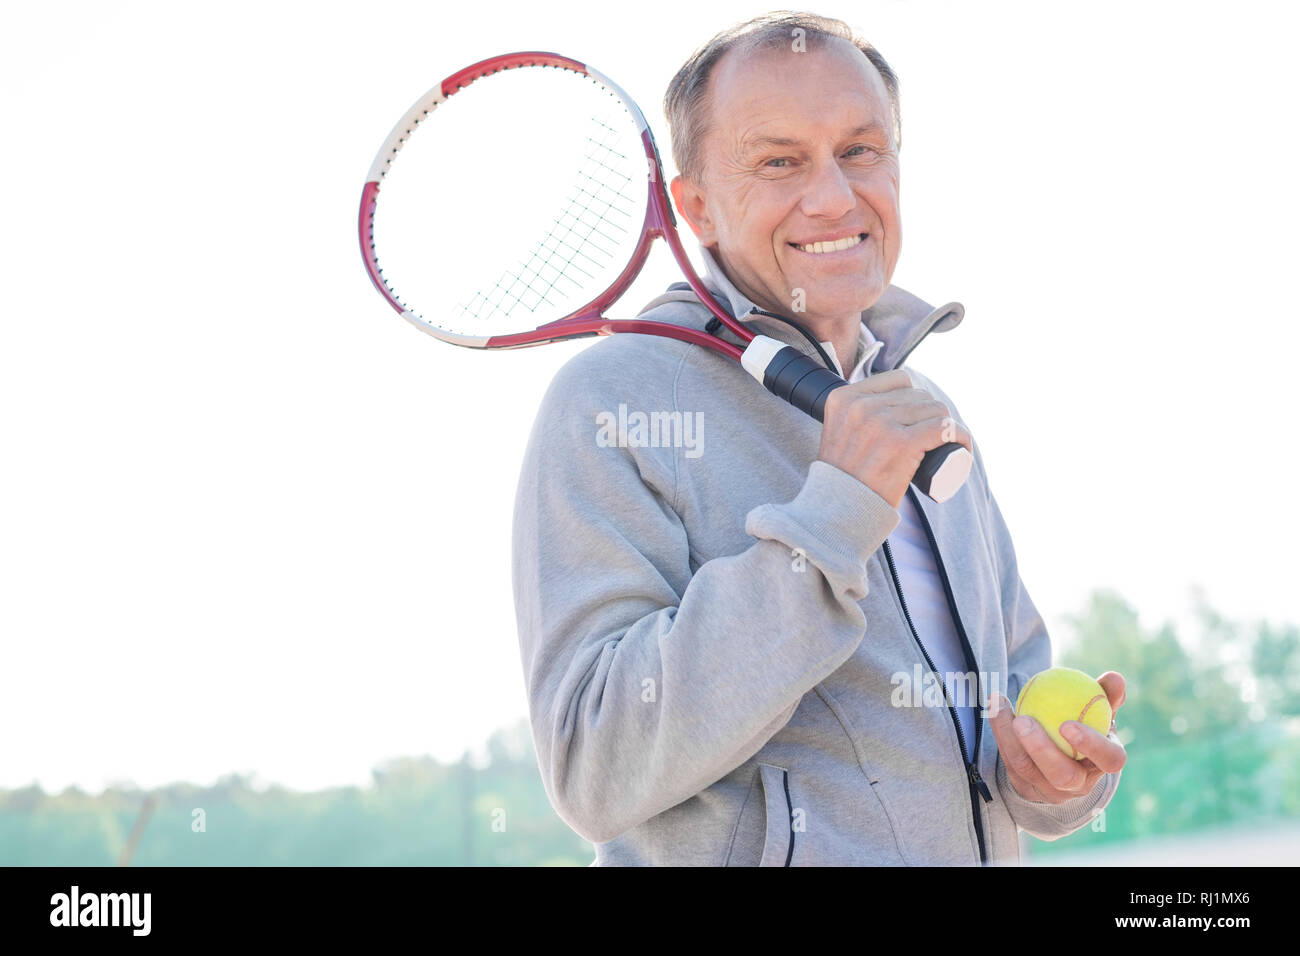 Portrait of smiling retired senior man standing with tennis racket and ball against clear sky on sunny day Stock Photo